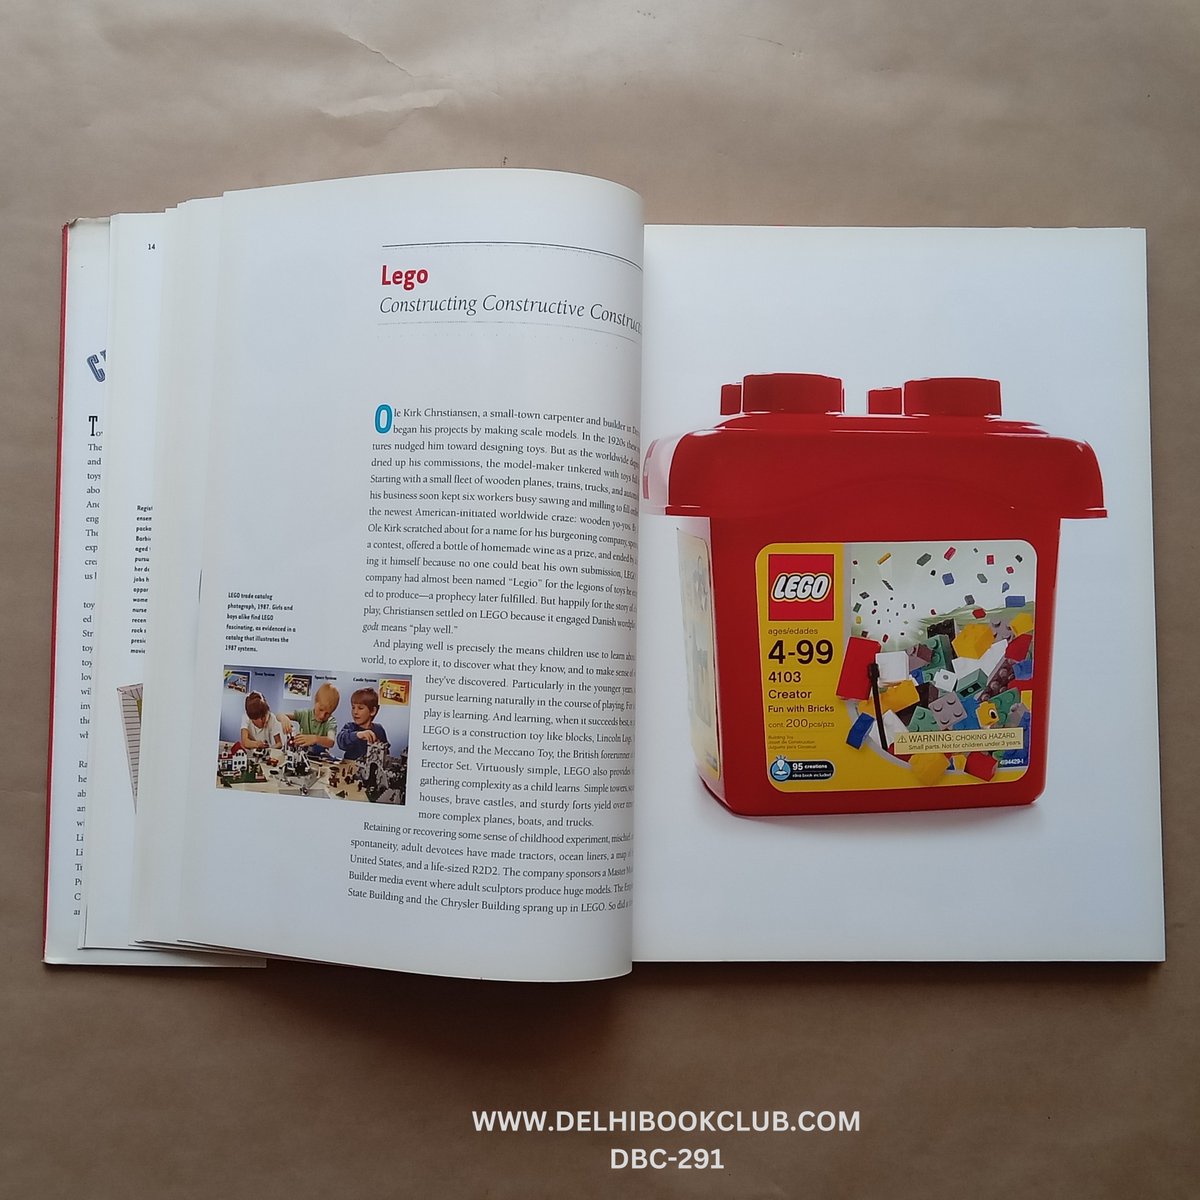 ISBN NO :-  9780762435654
Book Name :-Classic toys of the national toy hall of fame
Author Name :- Scott g. Eberle
Publisher :- RUNNING PRESS

DELHI BOOK CLUB

#delhibookclub
#Classictoys #Scottgeberle #year2009 #RUNNINGPRESS #FirstEdition #Antque #Toy #Unique 

#books